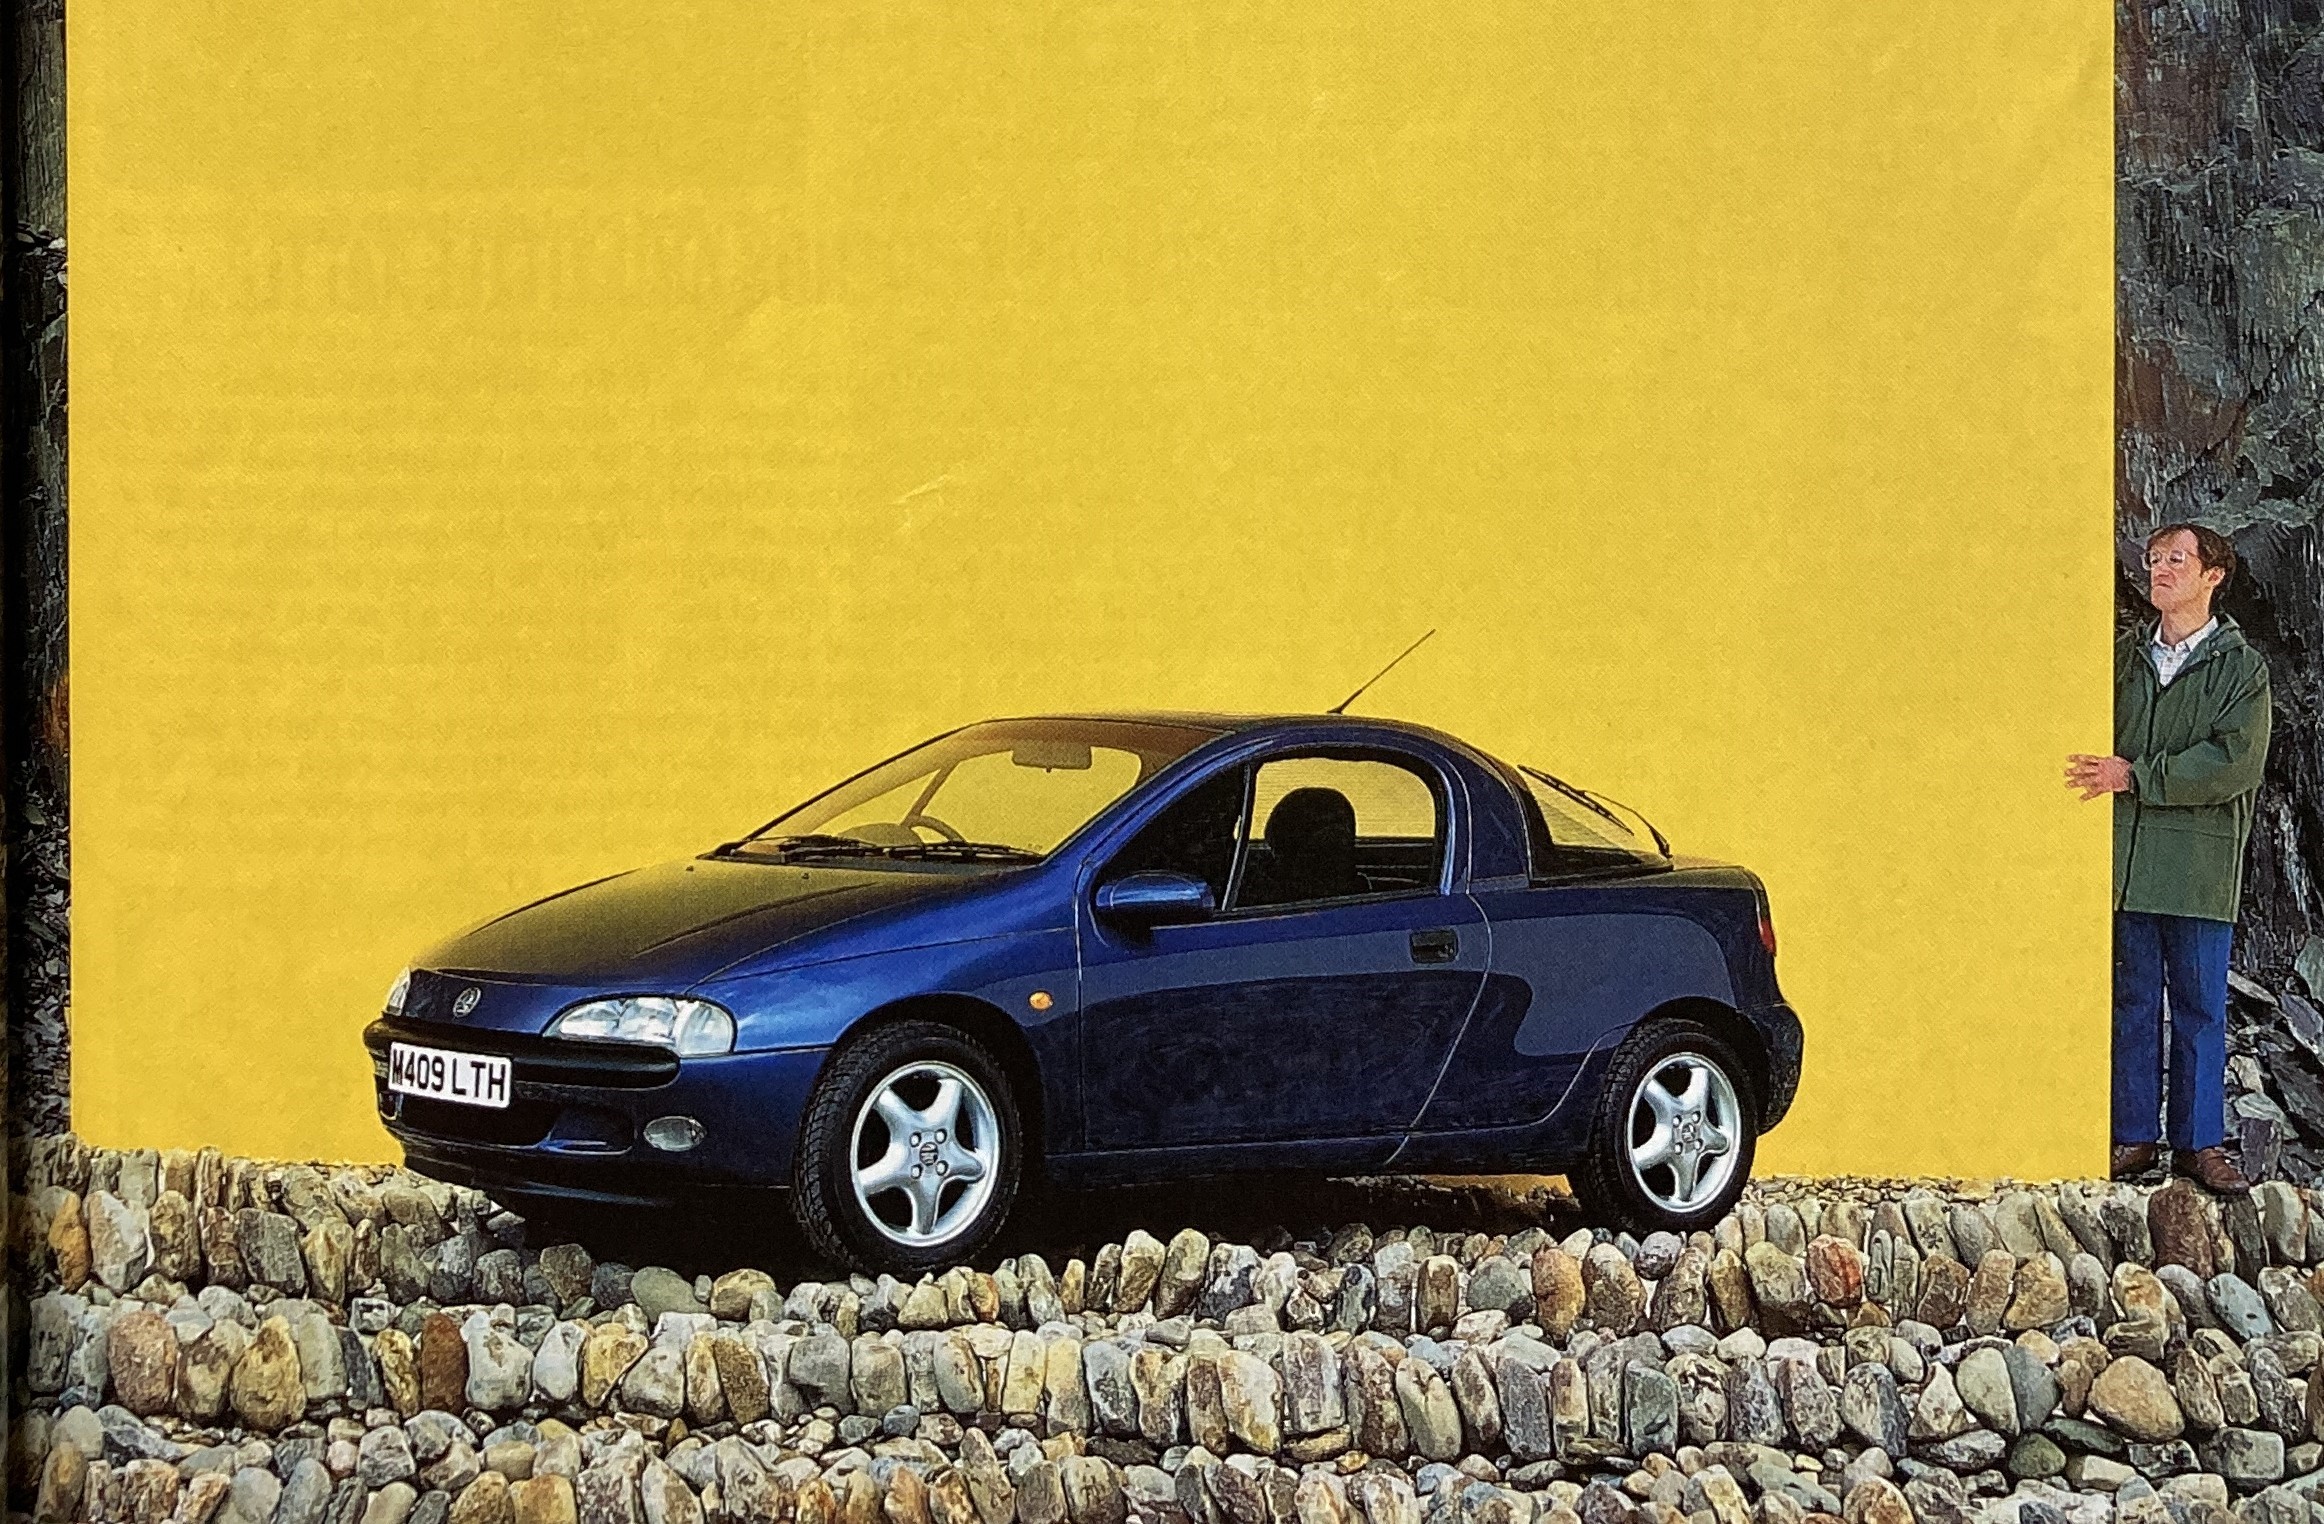 Ad Break: The Vauxhall Tigra was fun, if you like that sort of thing